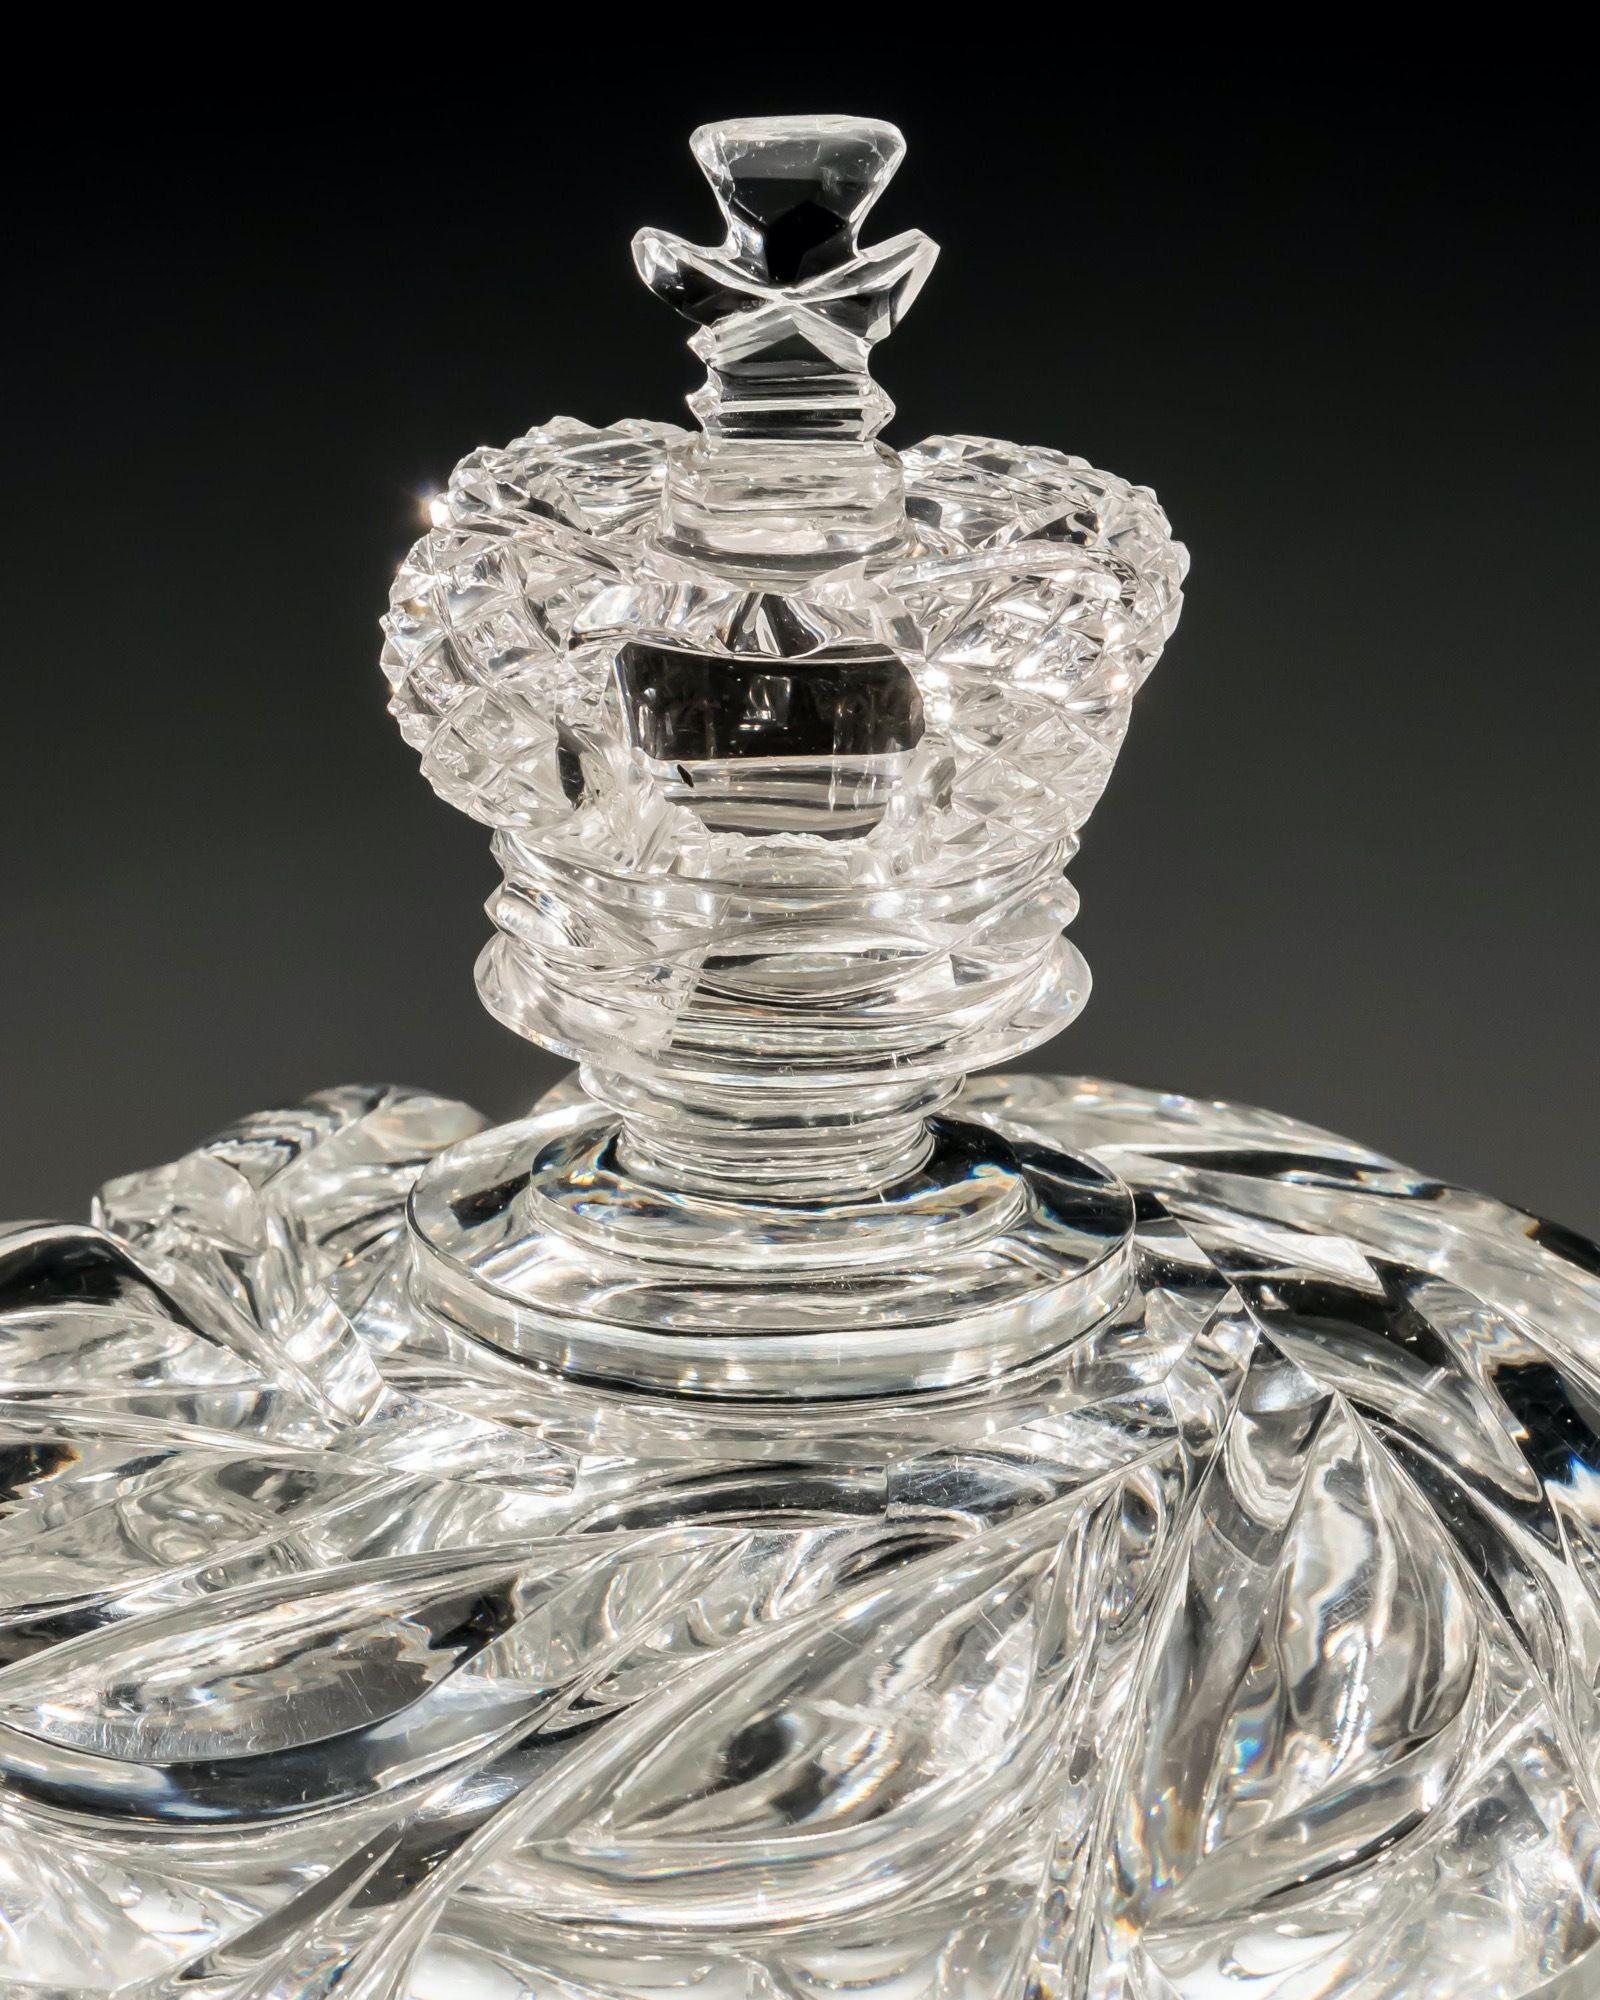 This magnificent cut glass urn stands on a Garter star cut foot, supporting the most unusual, deep scale and swirl cutting design. The corresponding lid unusually mounted with a crown finial, suggesting this was a special Royal commission.

Although